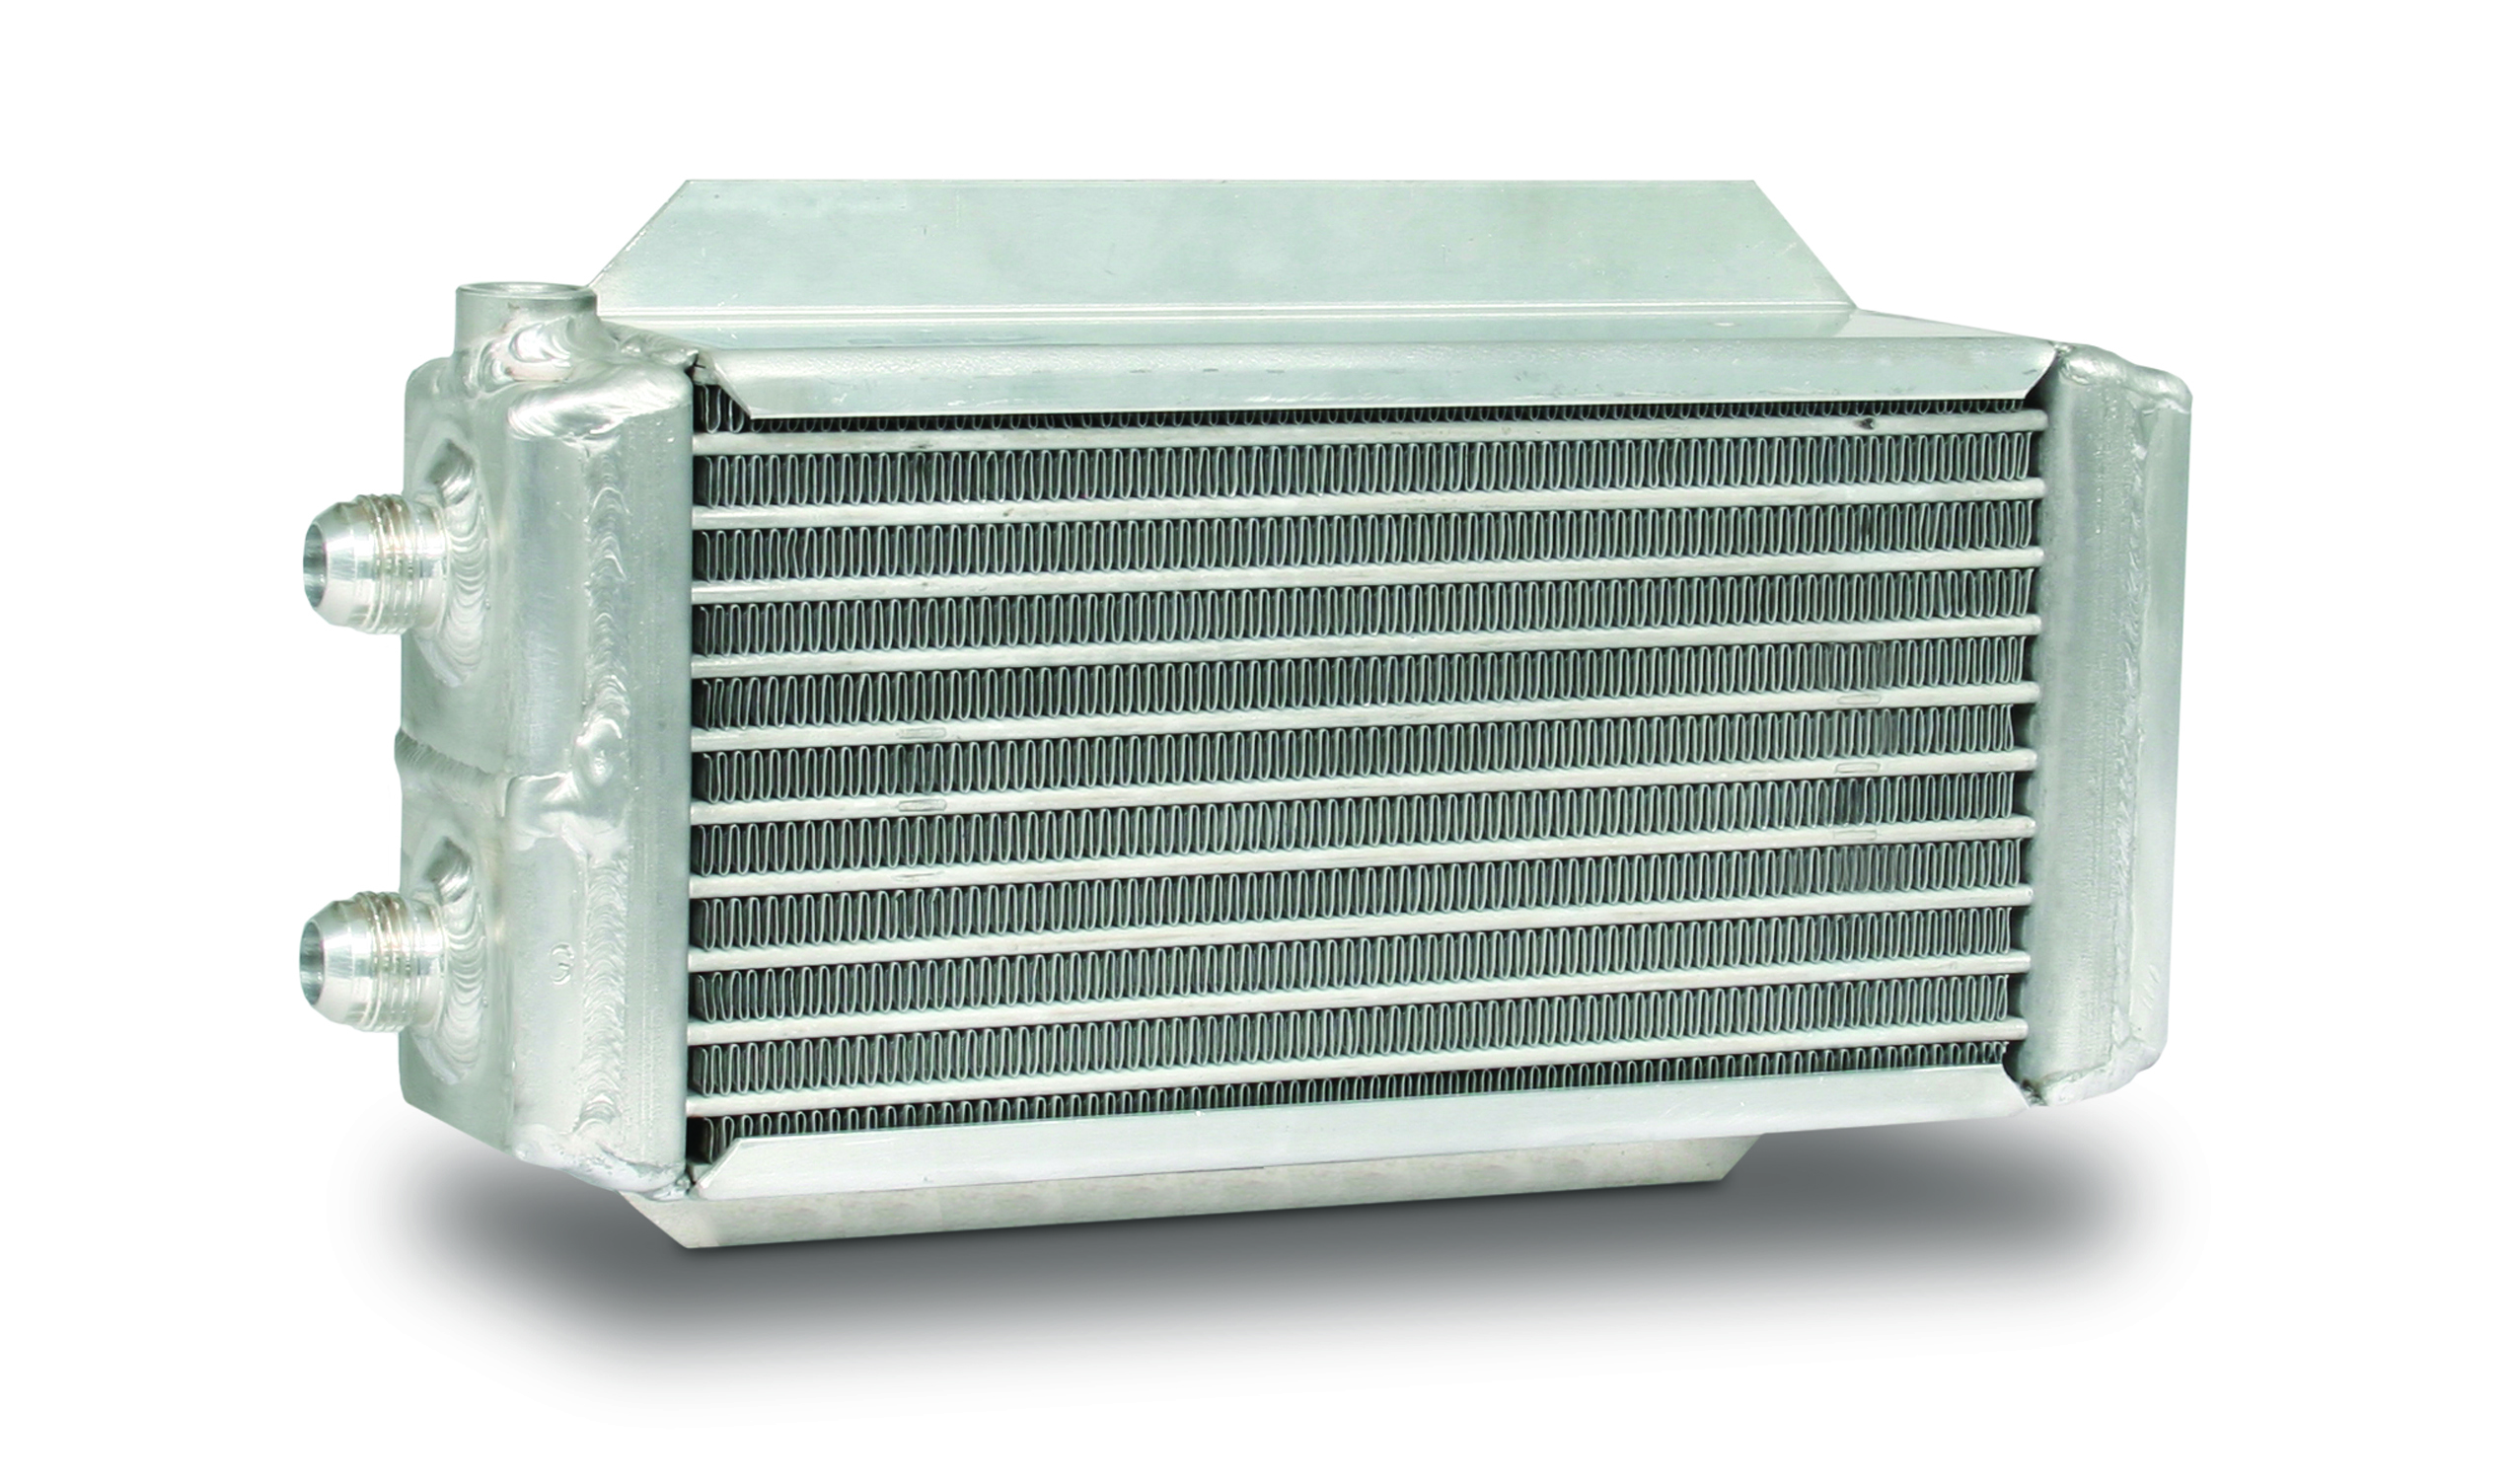 AFCO Racing Products 80268-12 Fluid Cooler, 15.250 x 8.563 x 3.500 in, Plate and Fin Type, 12 AN Male Inlet / Outlet, Deck Mount, Dual Passenger, Aluminum, Natural, Universal, Each